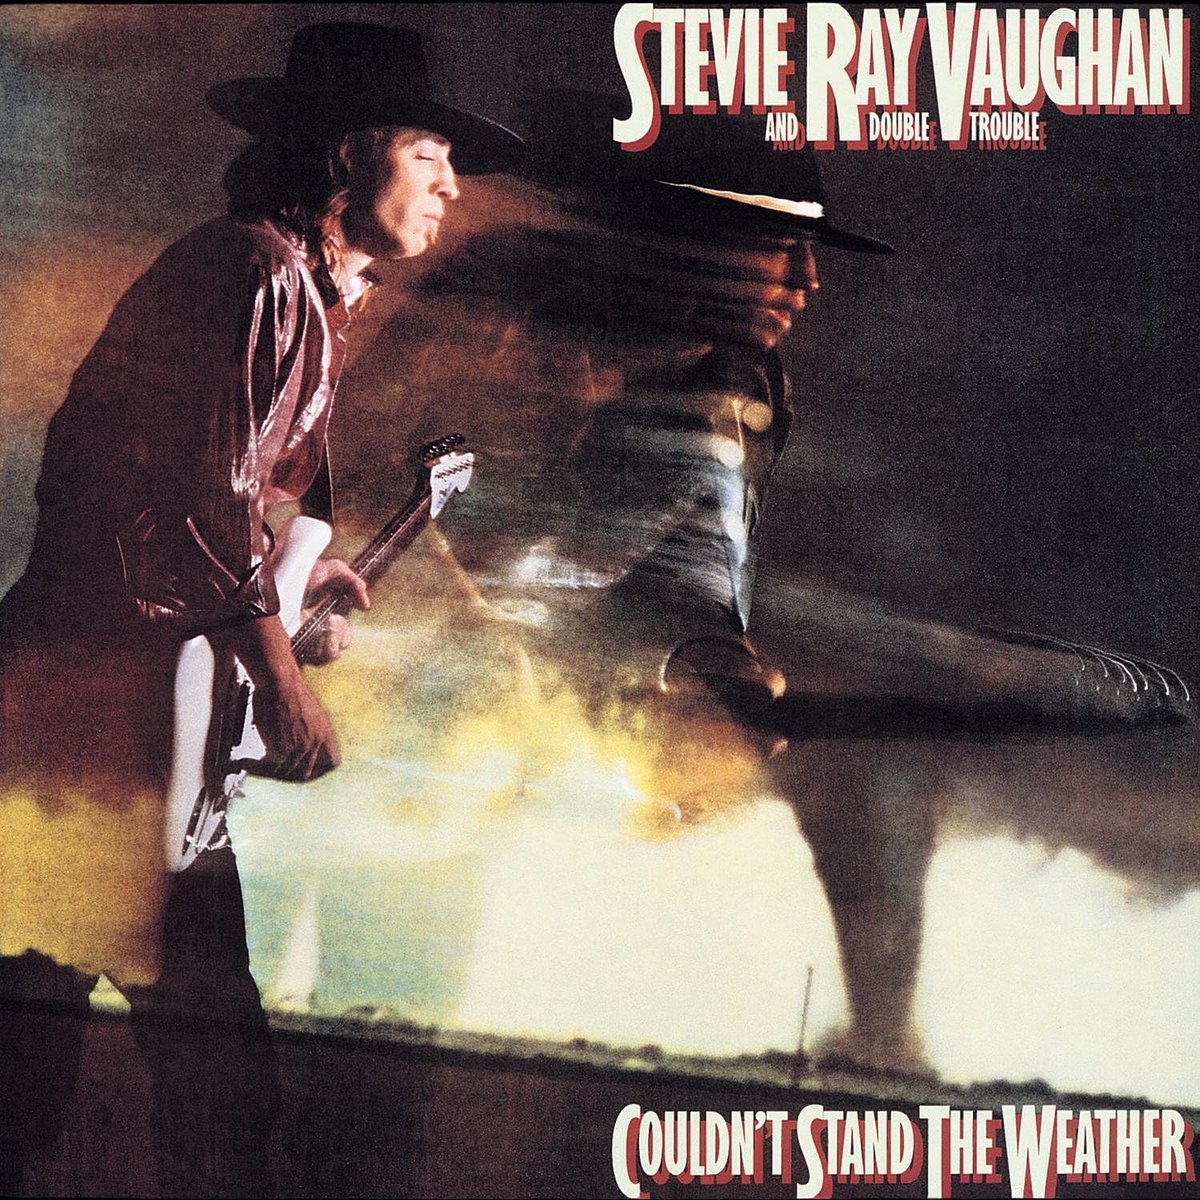 Stevie Ray Vaughan - Couldn't Stand the Weather, 1984  

The album reached No. 31 on the Billboard 200 chart. 
Received praise for Vaughan’s playing and highlighted songs such as 'Voodoo Chile' and 'Tin Pan Alley'. 

#StevieRayVaughan